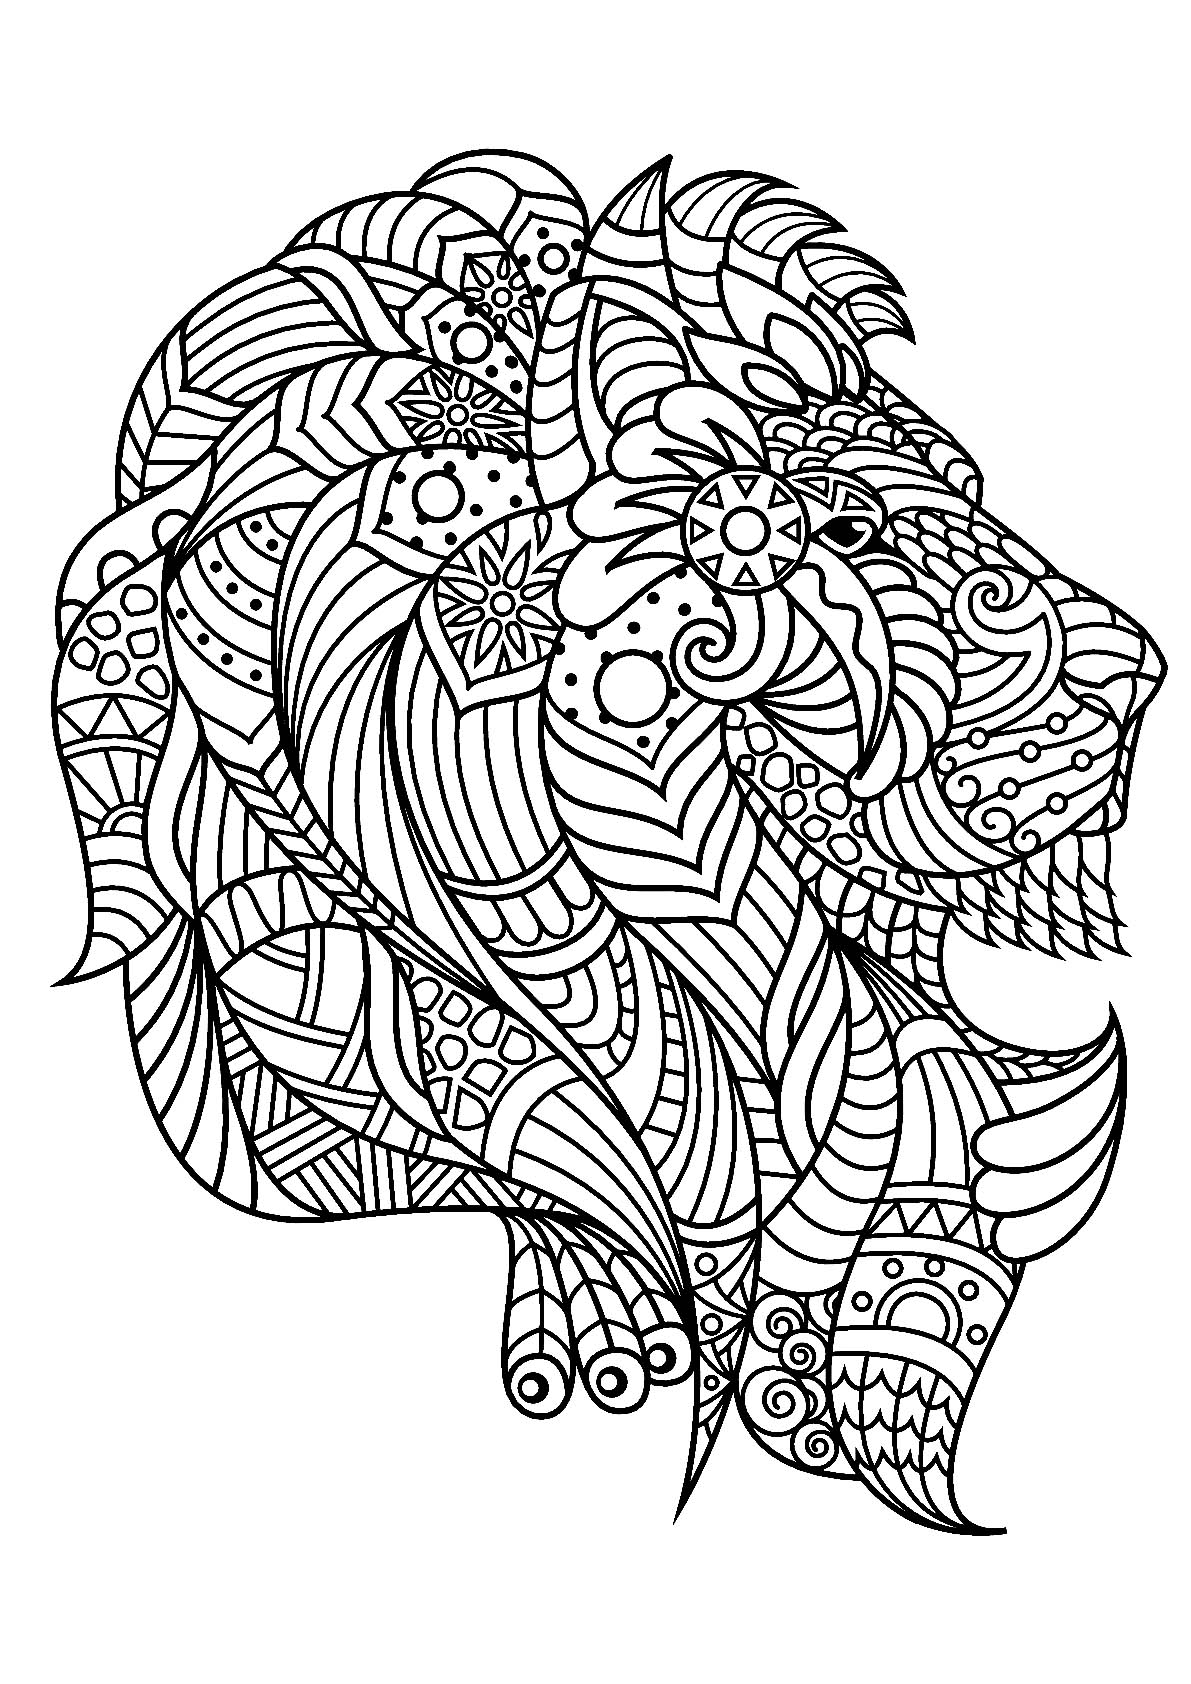 Lion to download - Lion Kids Coloring Pages